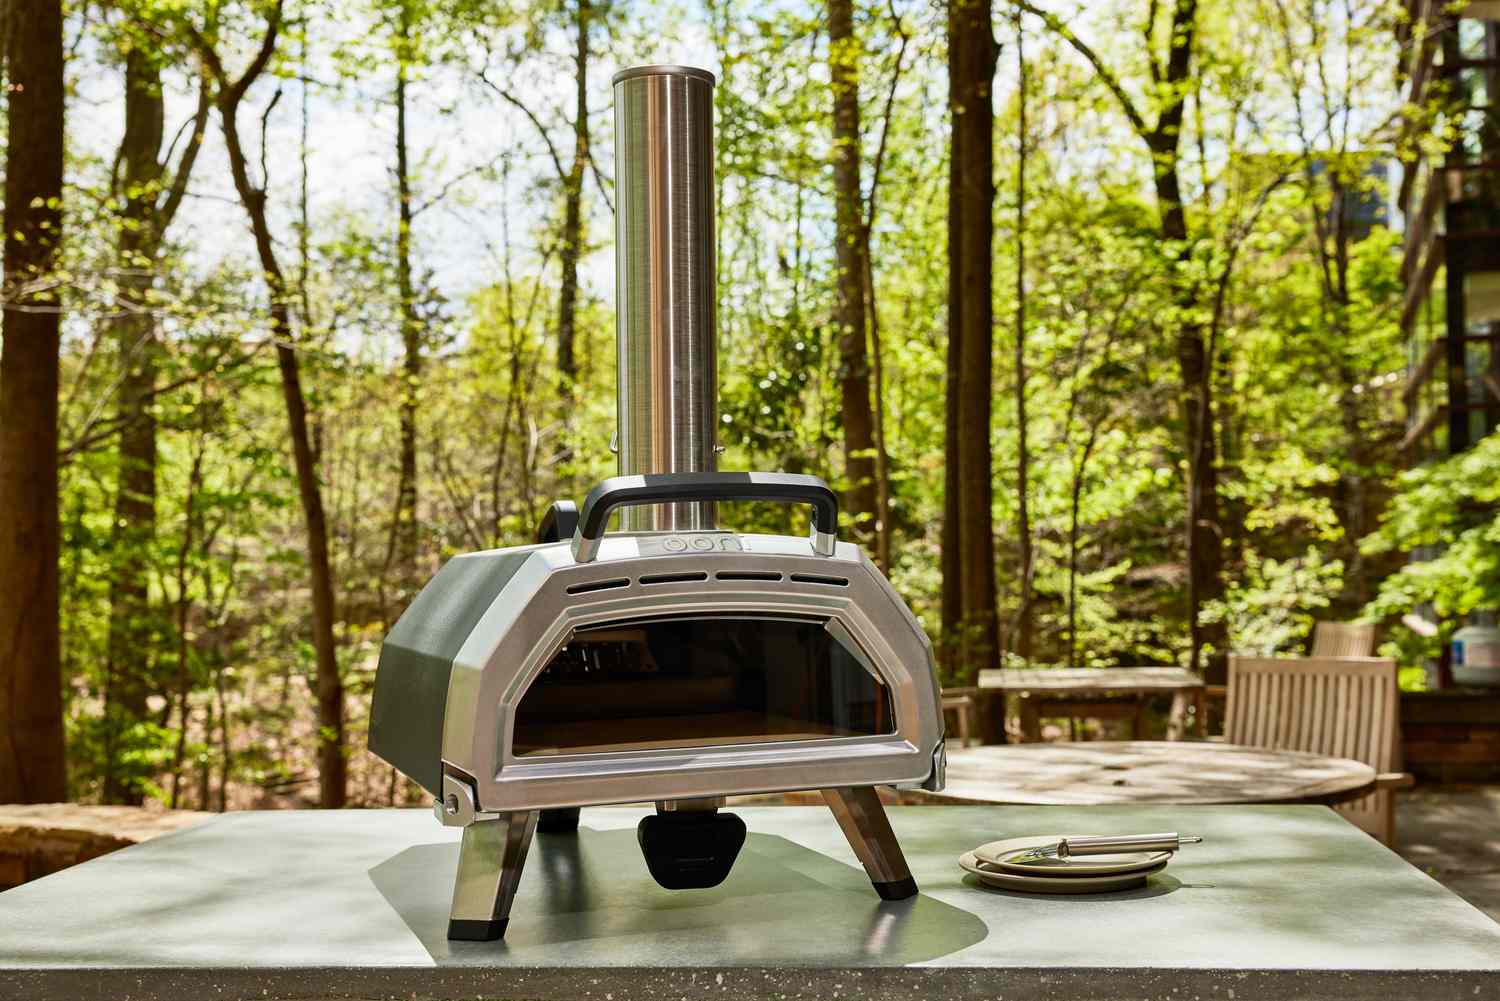 Hurry: One of Our Favorite Ooni Pizza Ovens Is on Rare Sale for Memorial Day [Video]